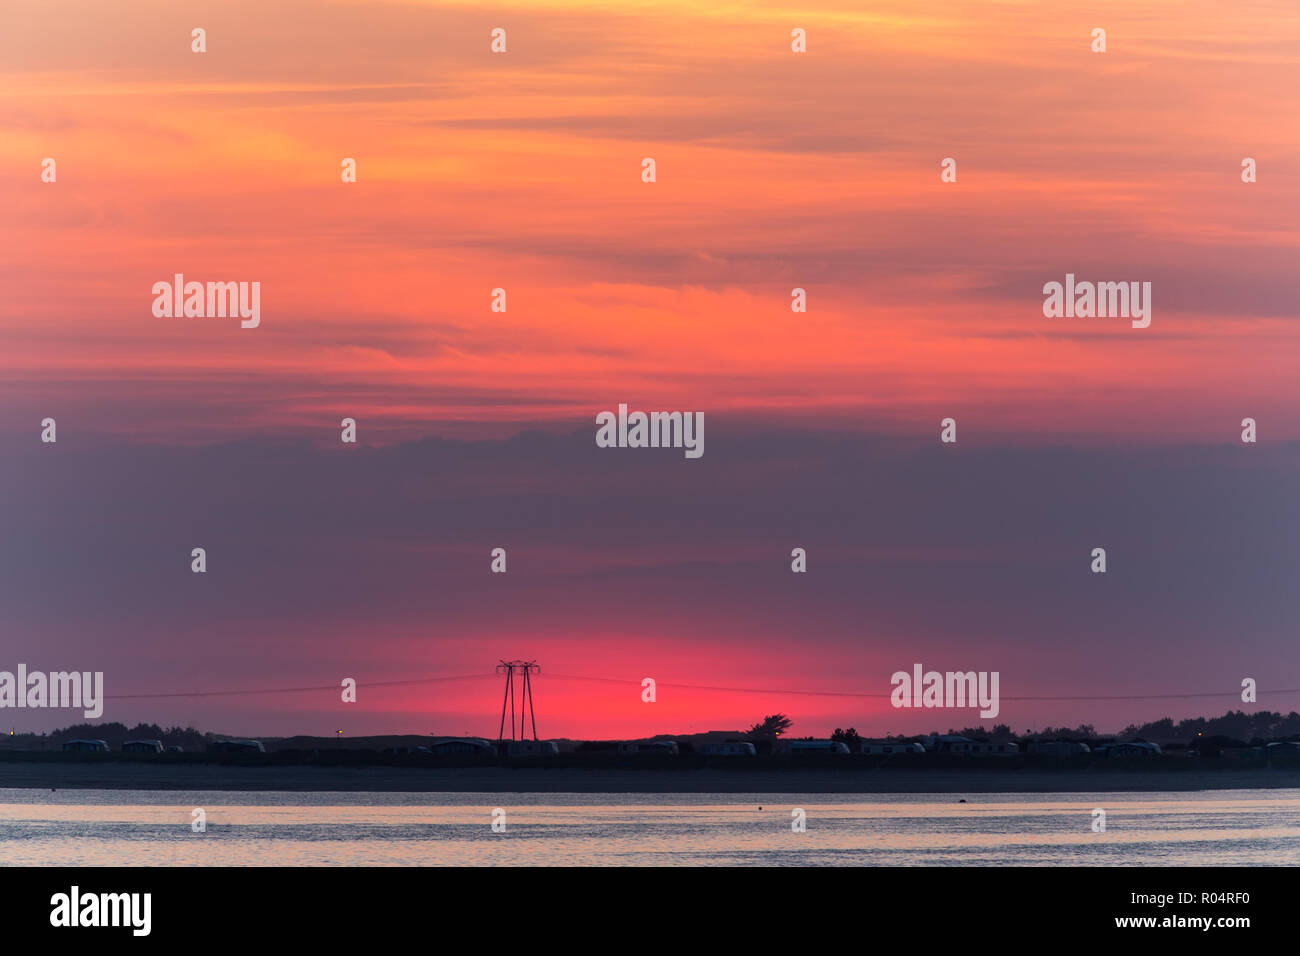 Red sunset over Carnac beach with electric pylons, Brittany, France Stock Photo